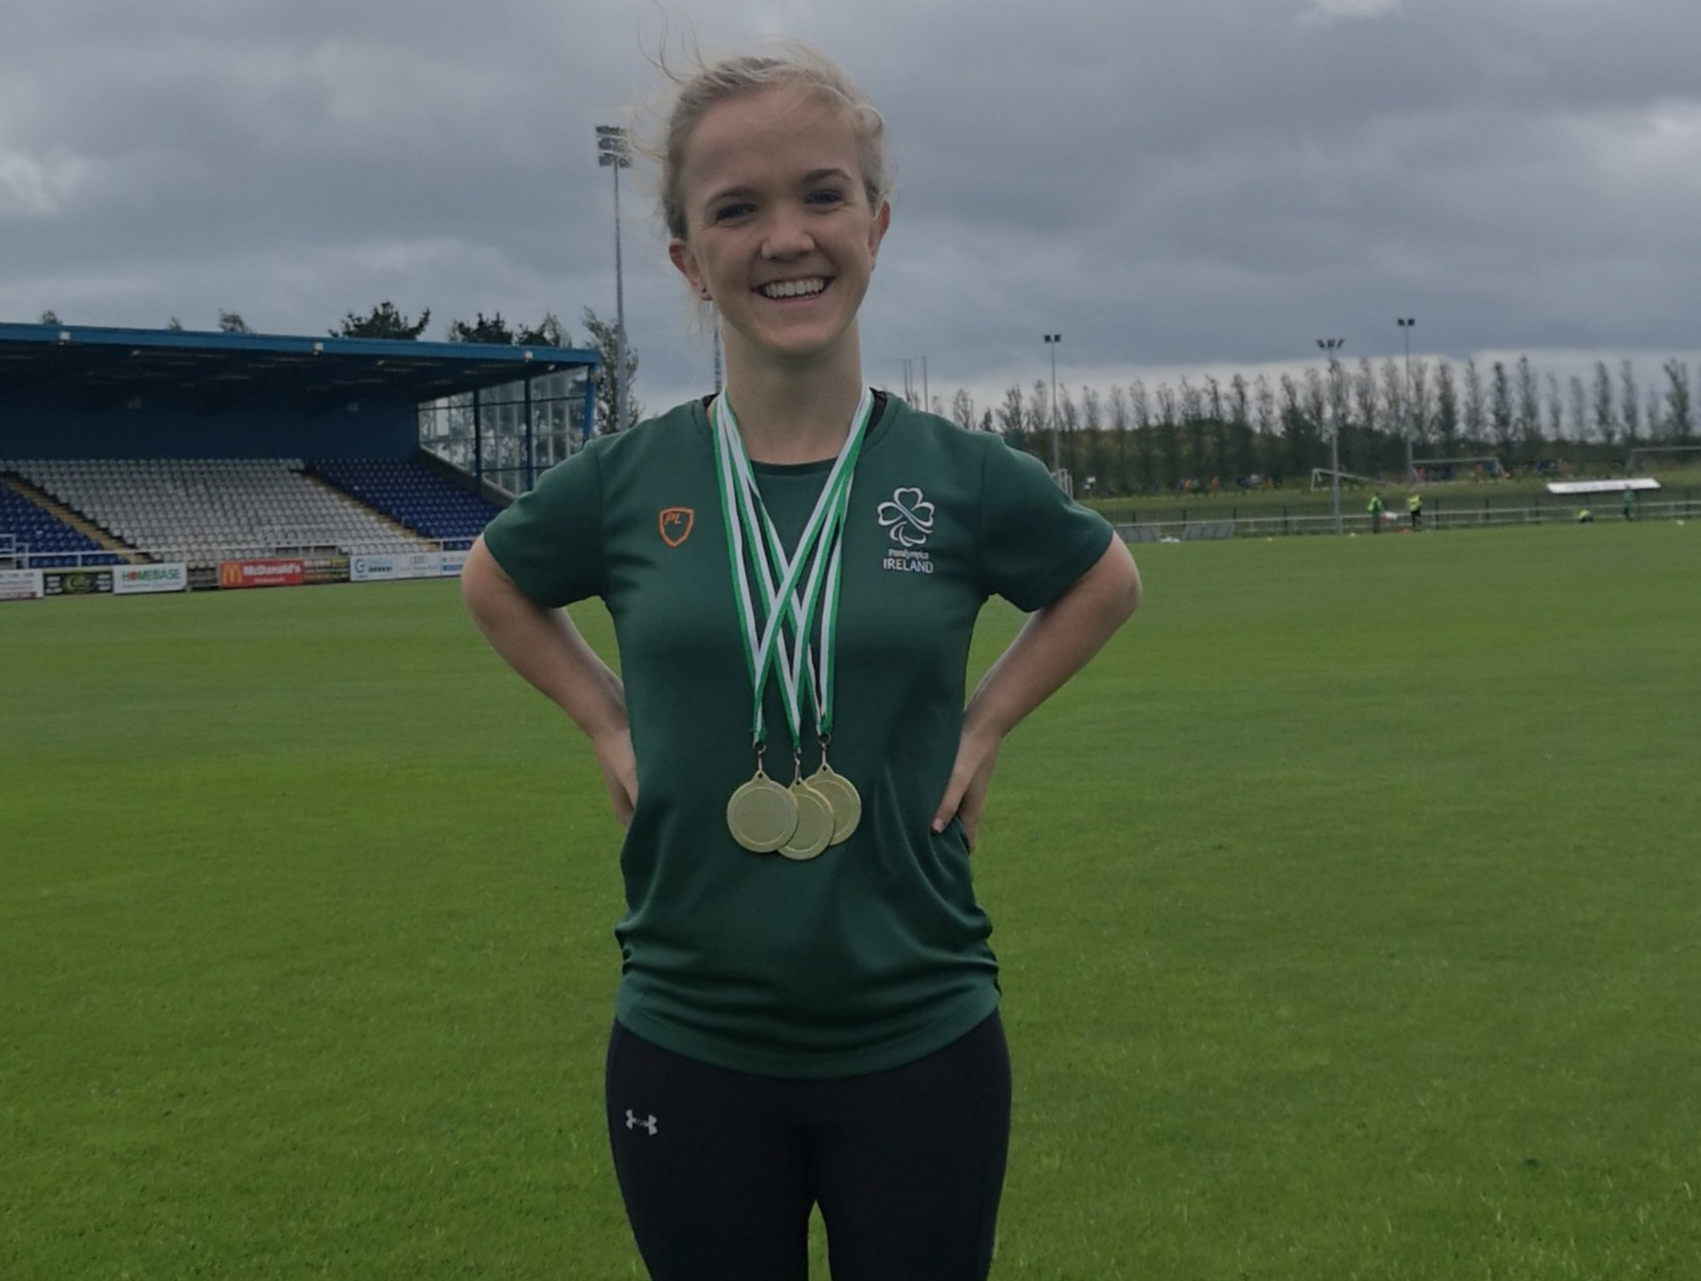 Mary Fitzgerald wins gold and breaks records